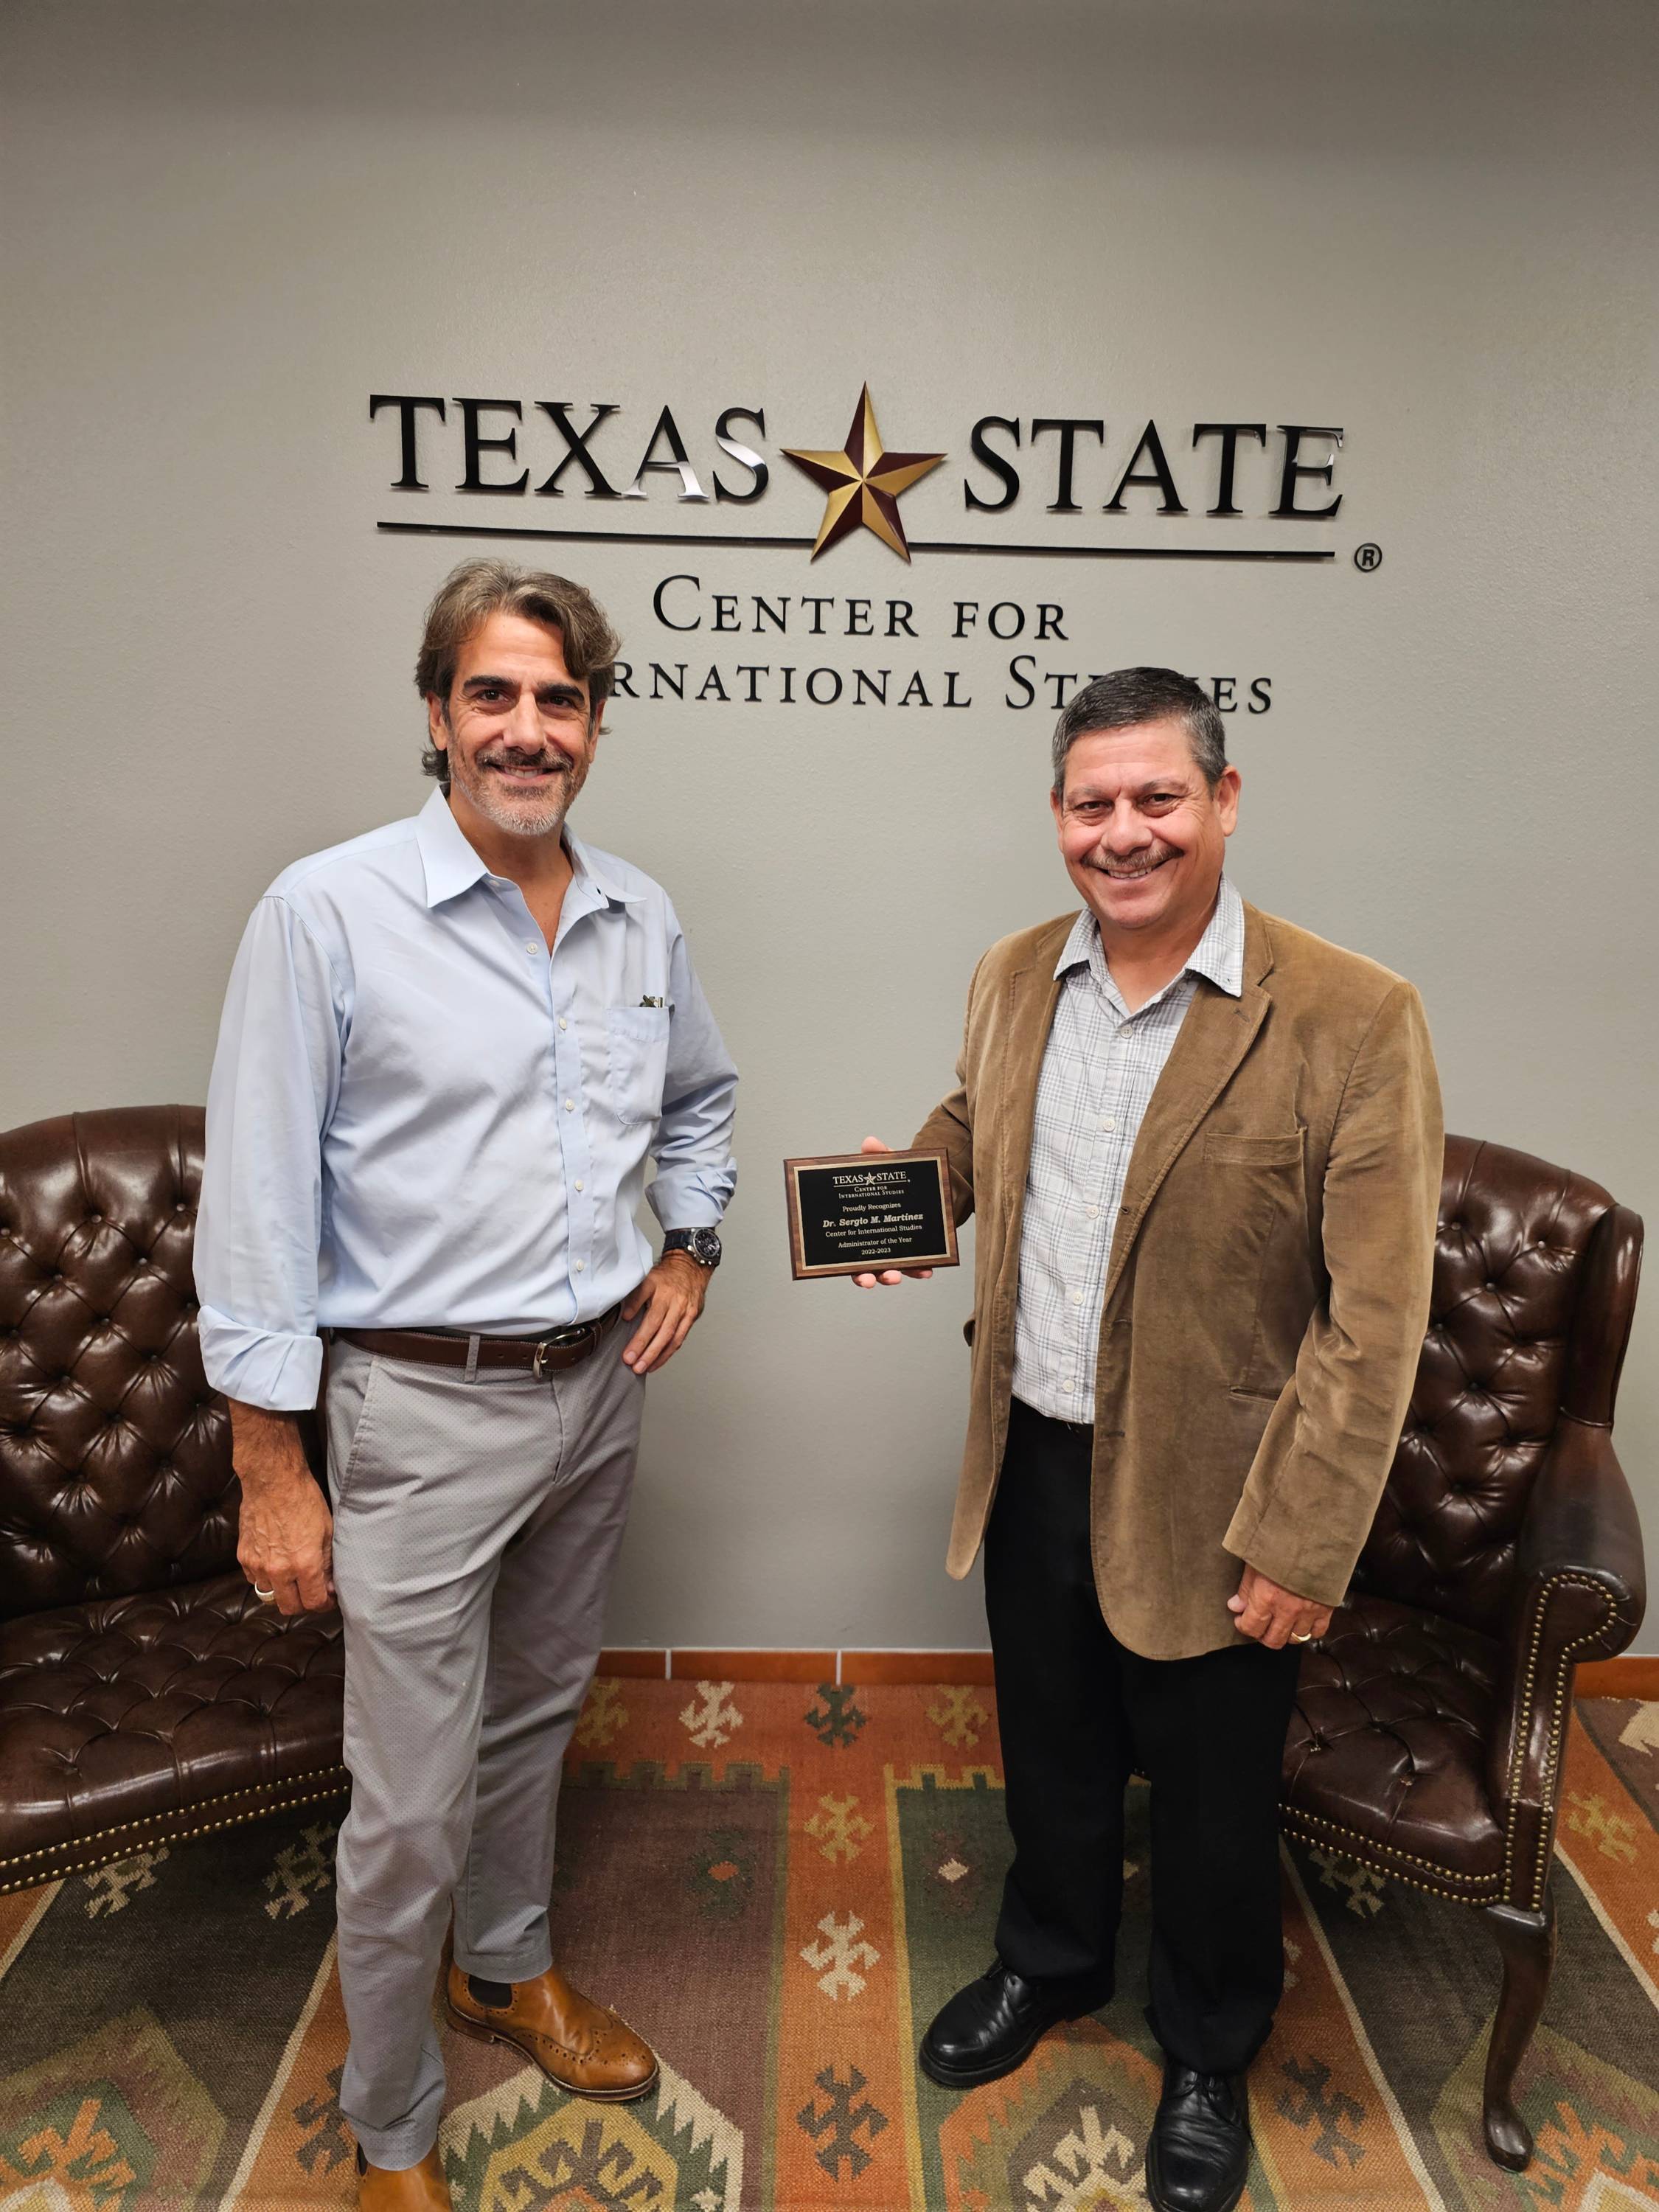 Dr. Paul Hart and Dr. Sergio Martinez stand in front of the IS logo with an award plaque